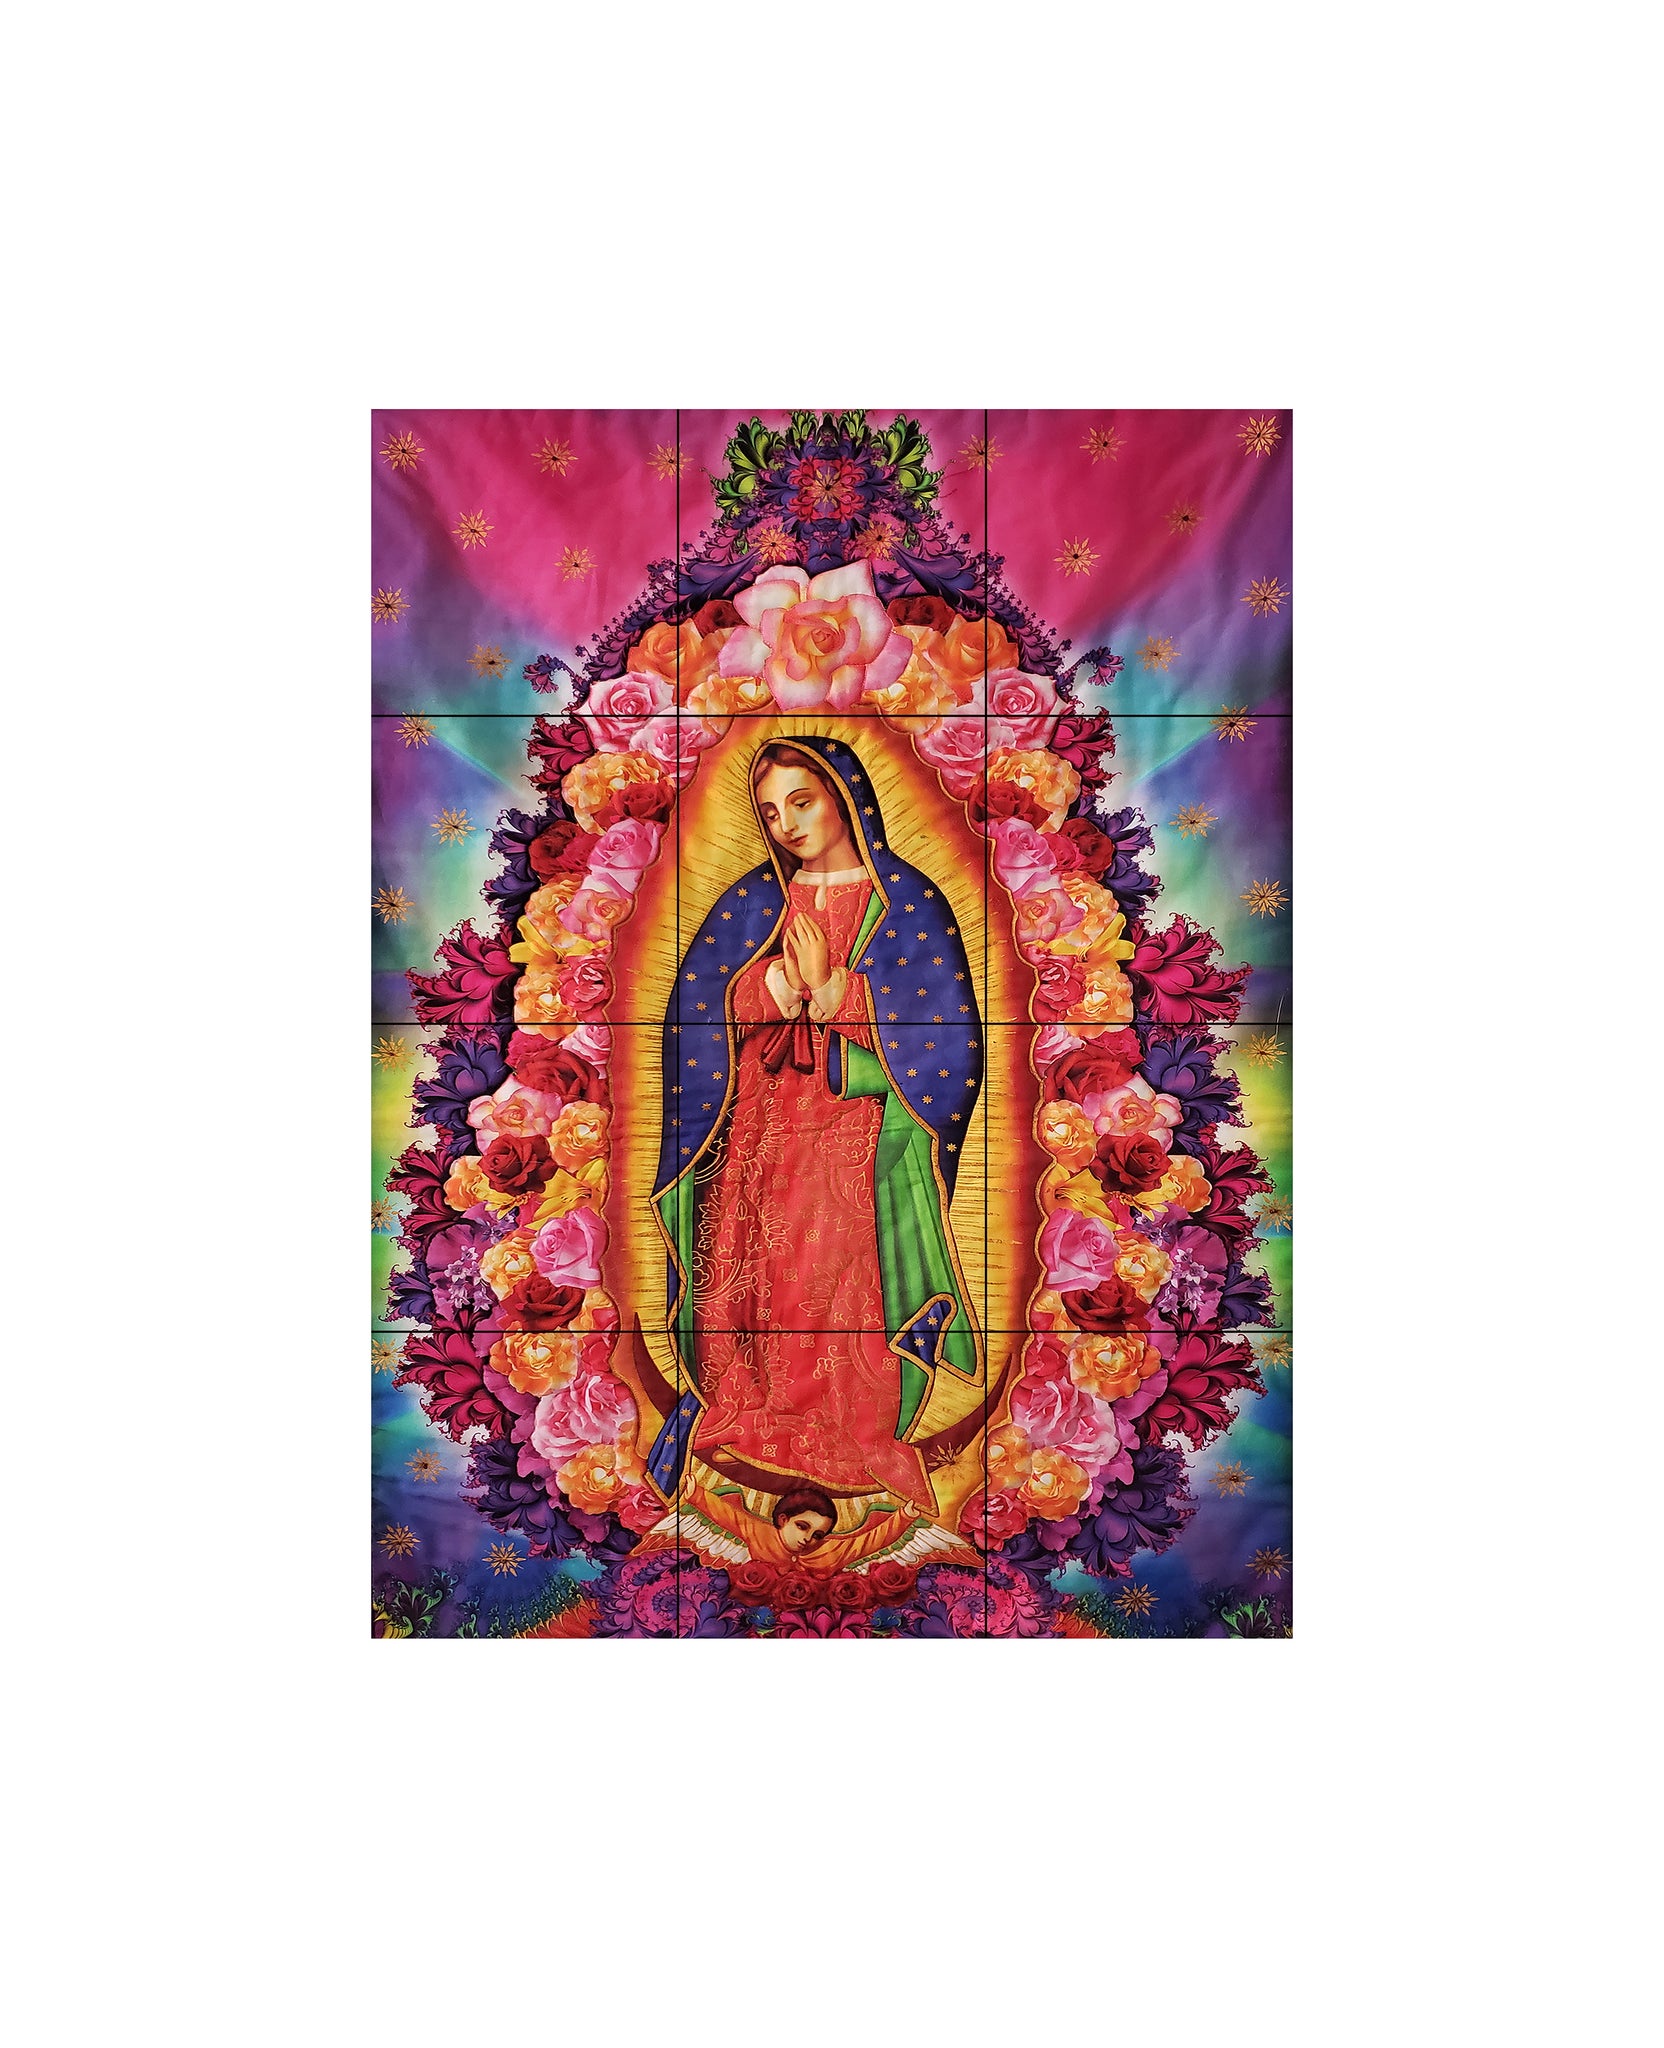 Colorful image of Our Lady of Guadalupe